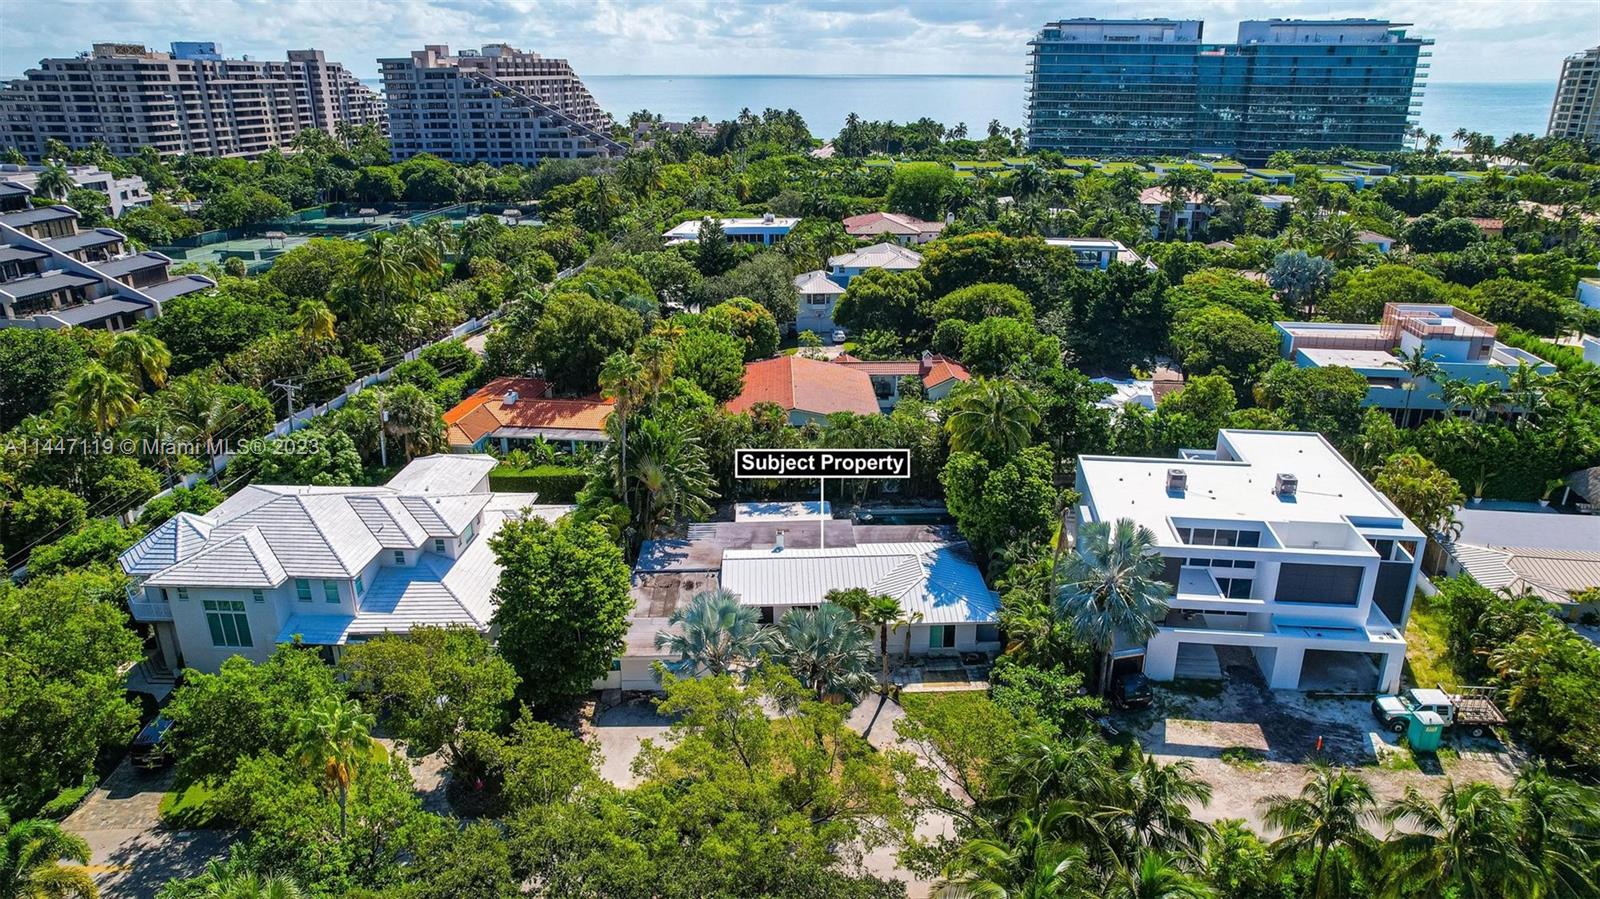 BUILD YOUR key biscayne dream home STEPS FROM THE BEACH! OVER 12,000 SQ FT LOT IN the high demand key colony neighboorhood. ENJOY ocean access from sonesta dr. a golf cart ride away from shopping and dining! play a round at the famous crandon golf course or treat yourself to spa days at the ritz. Have peace of mind with the islands own police and fire departments. A + schools and more. grab YOUR SLICE OF ISLAND PARADISE!